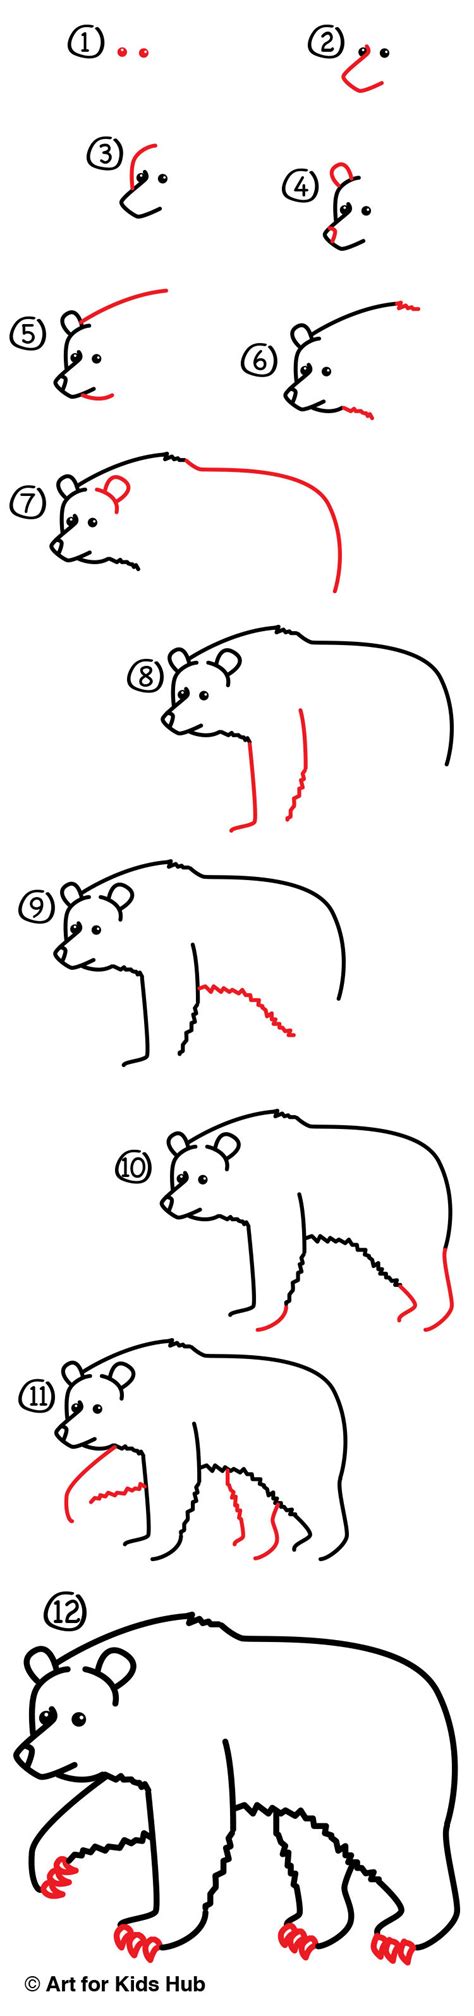 How To Draw A Grizzly Bear Realistic Art For Kids Hub